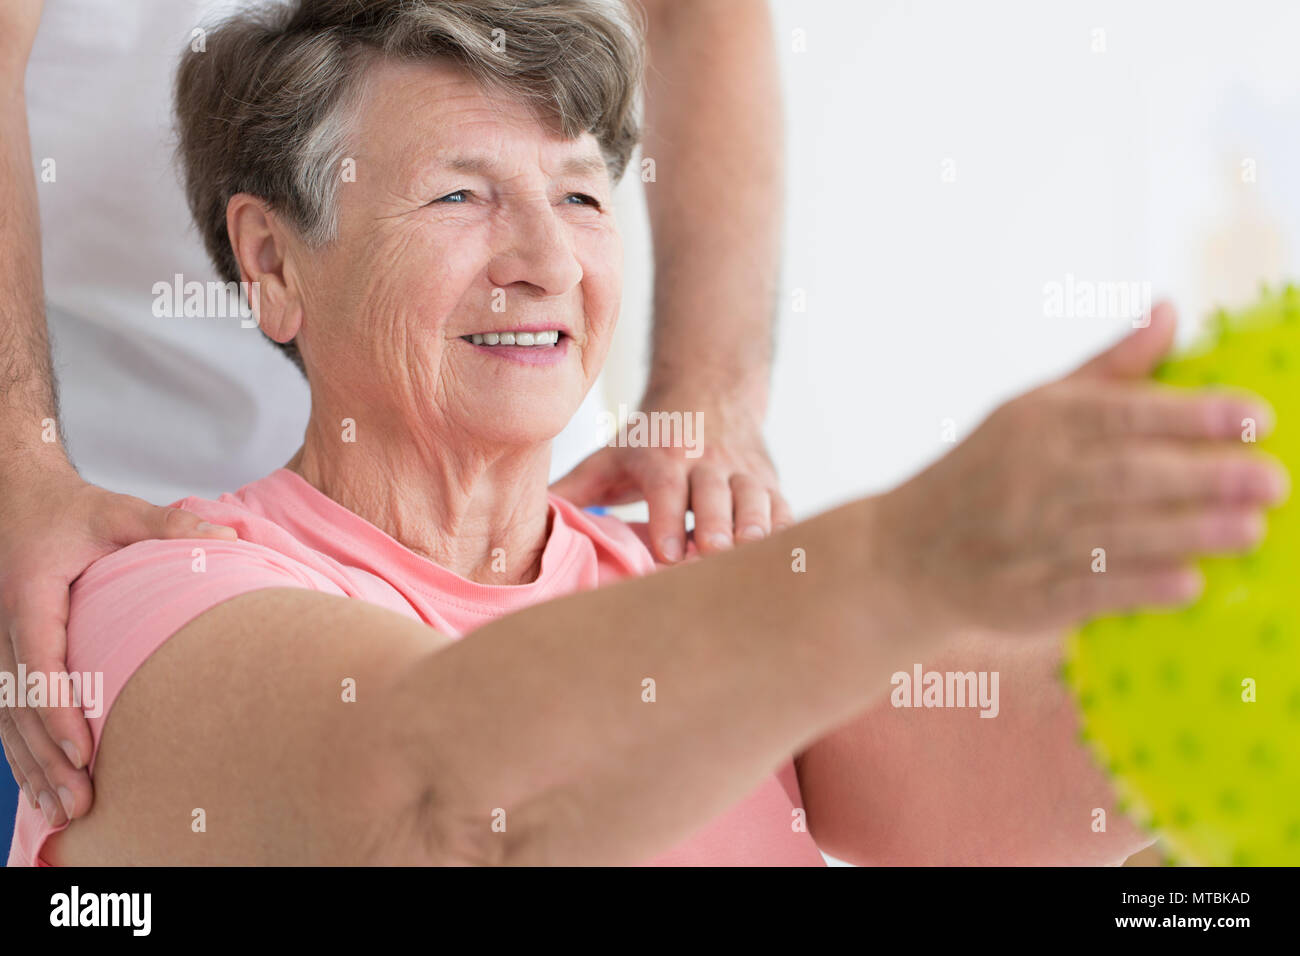 Elderly Woman Enjoying Her Isometric Exercises With A Yellow Spiked